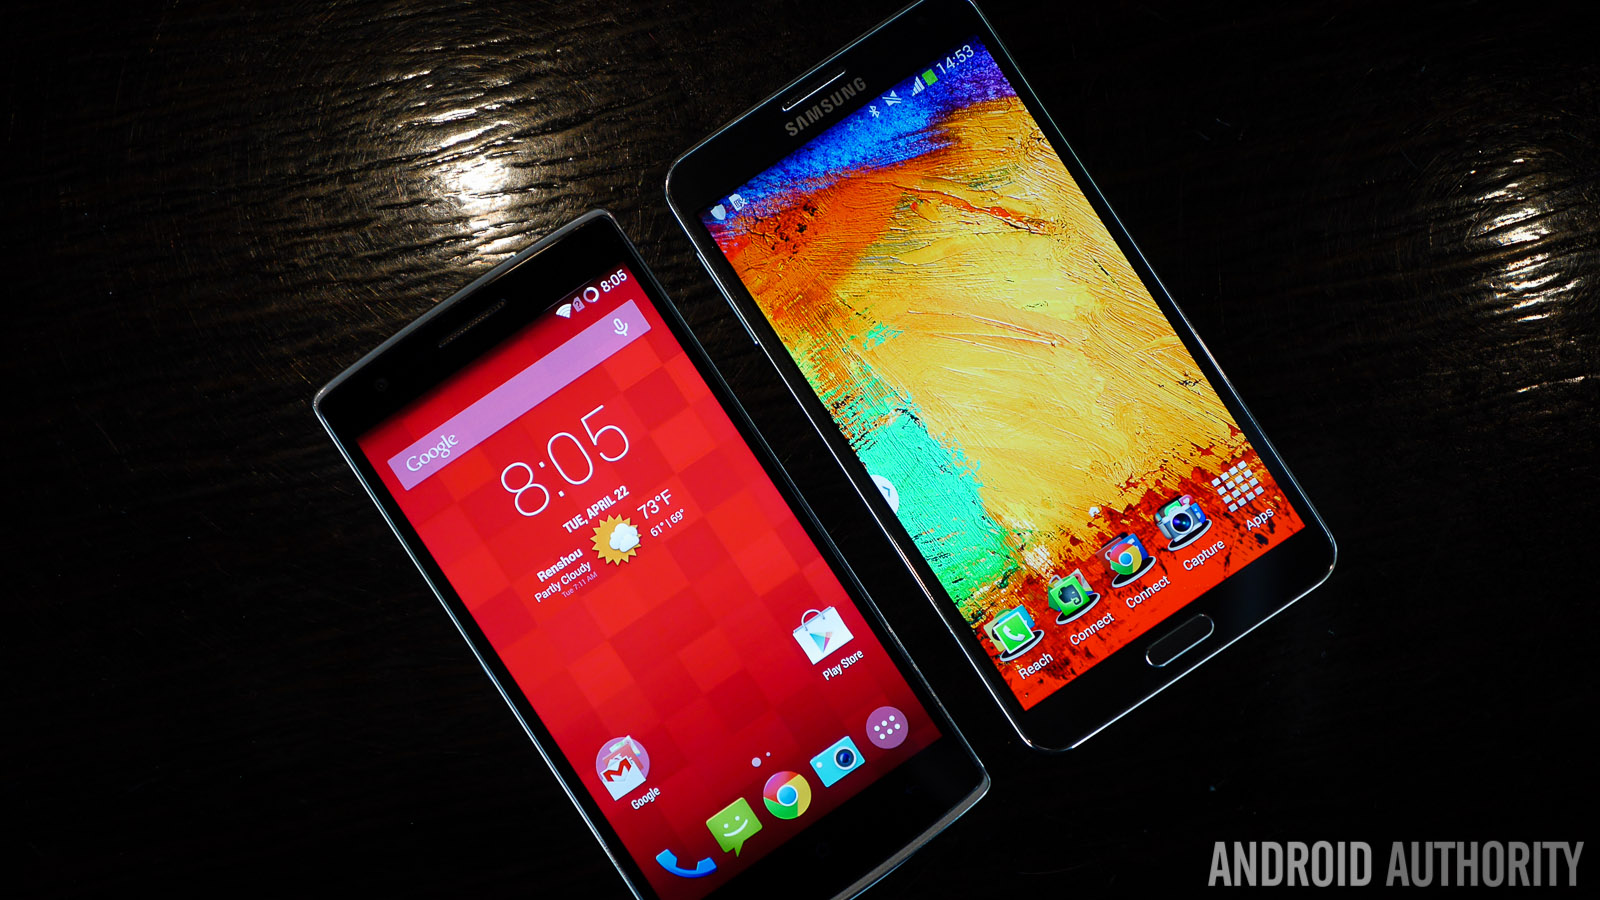 oneplus one vs galaxy note 3 aa (6 of 17)